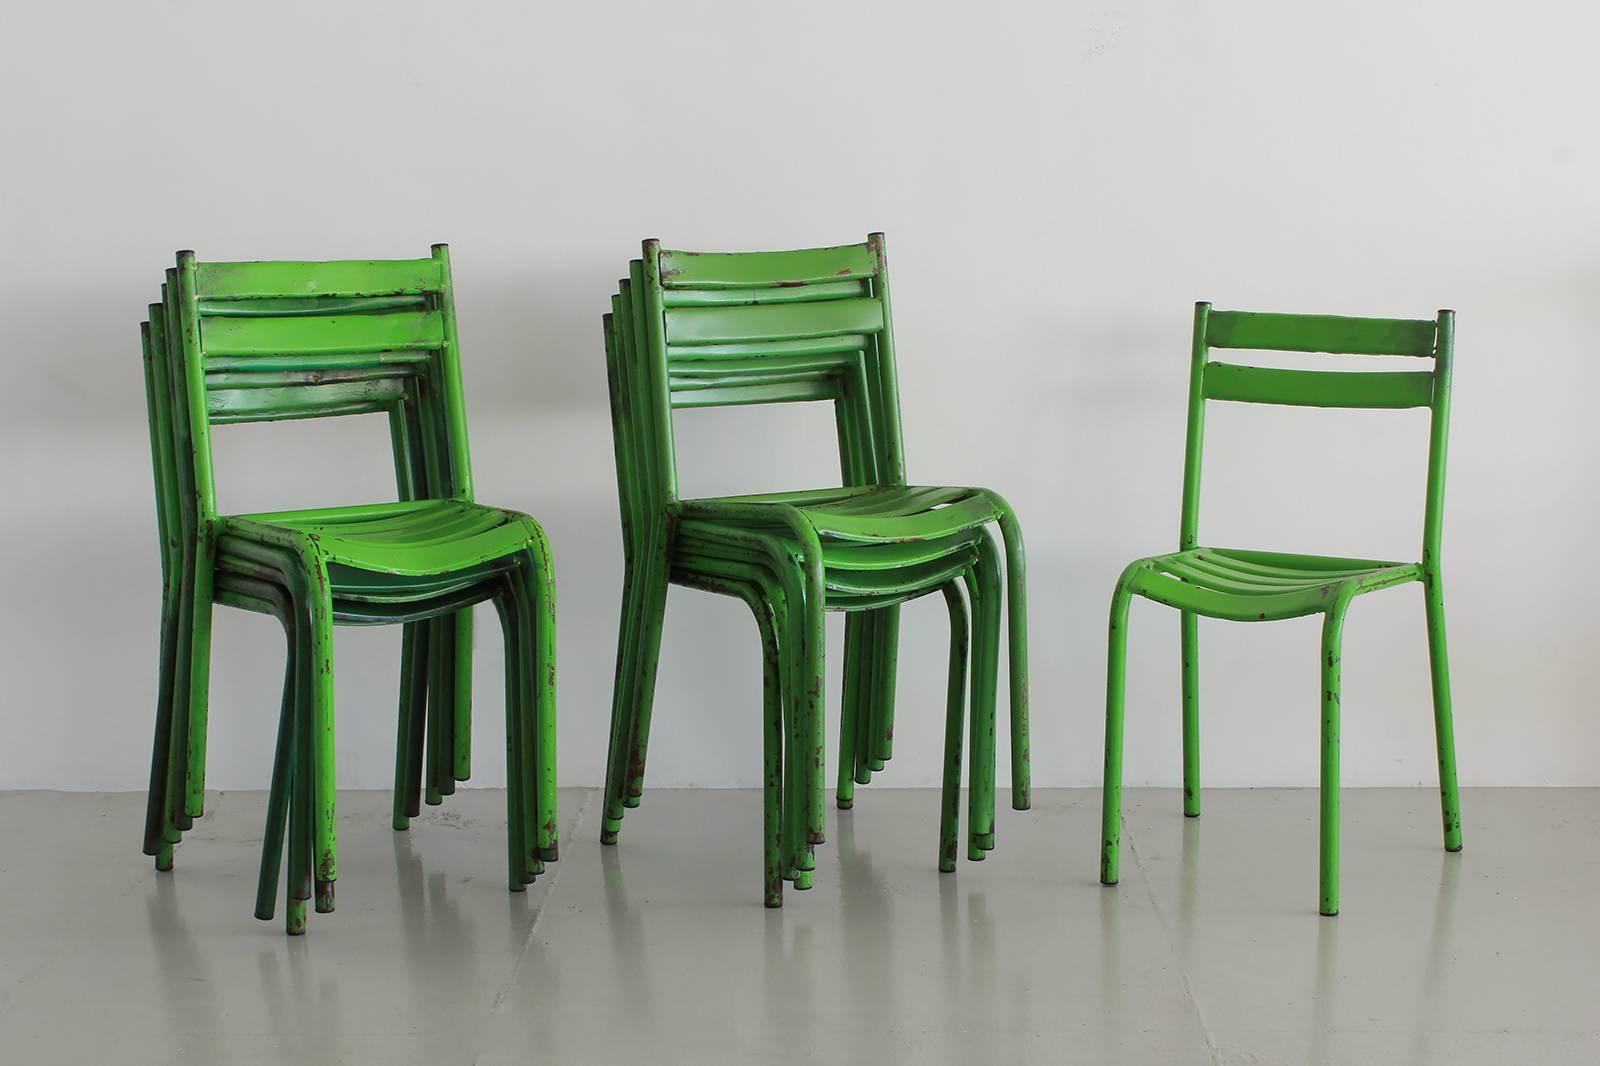  French Cafe chairs with fantastic green original paint. Wonderful patina and shape. Sold individually.
Currently a total of 9 
Sold 